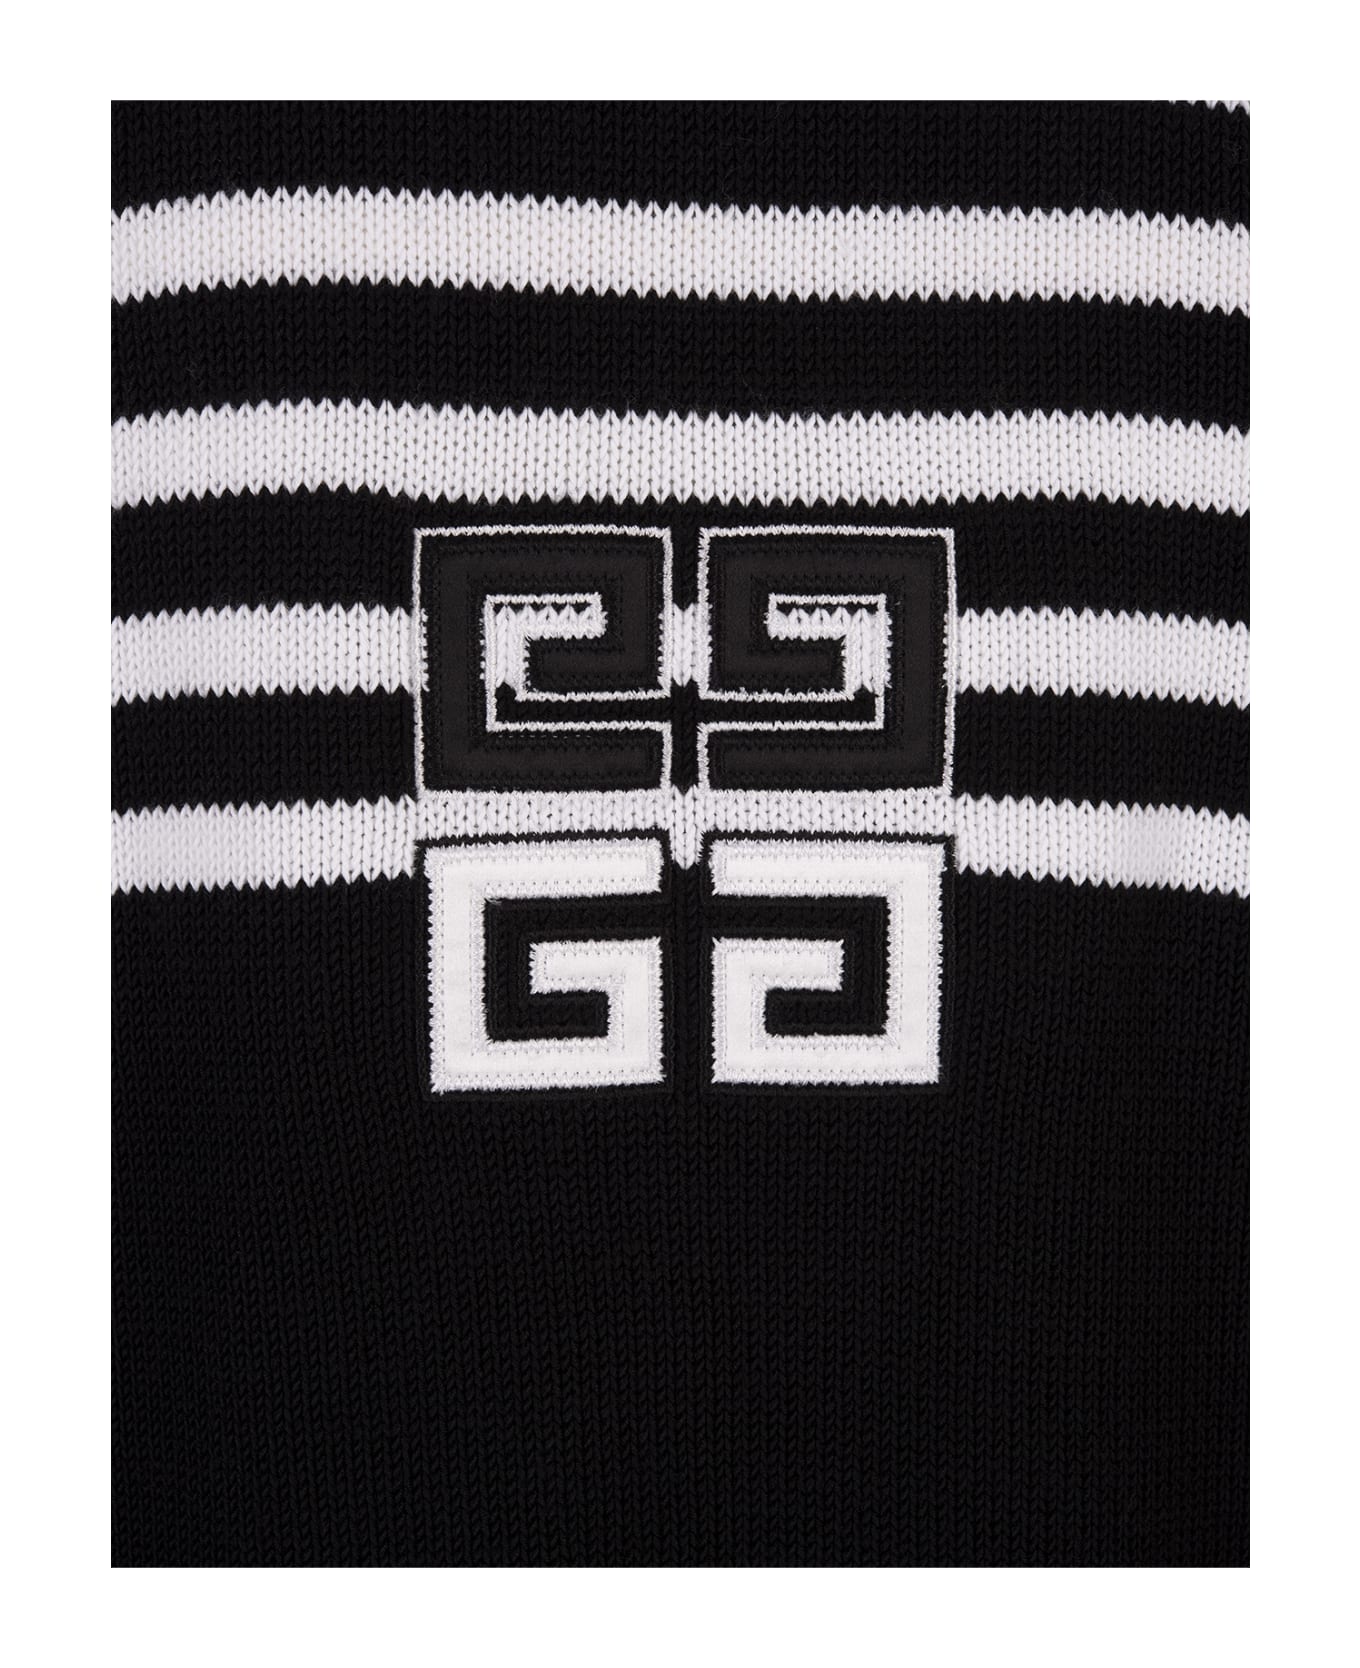 Givenchy 4g Striped Cardigan In Black Cotton - Black